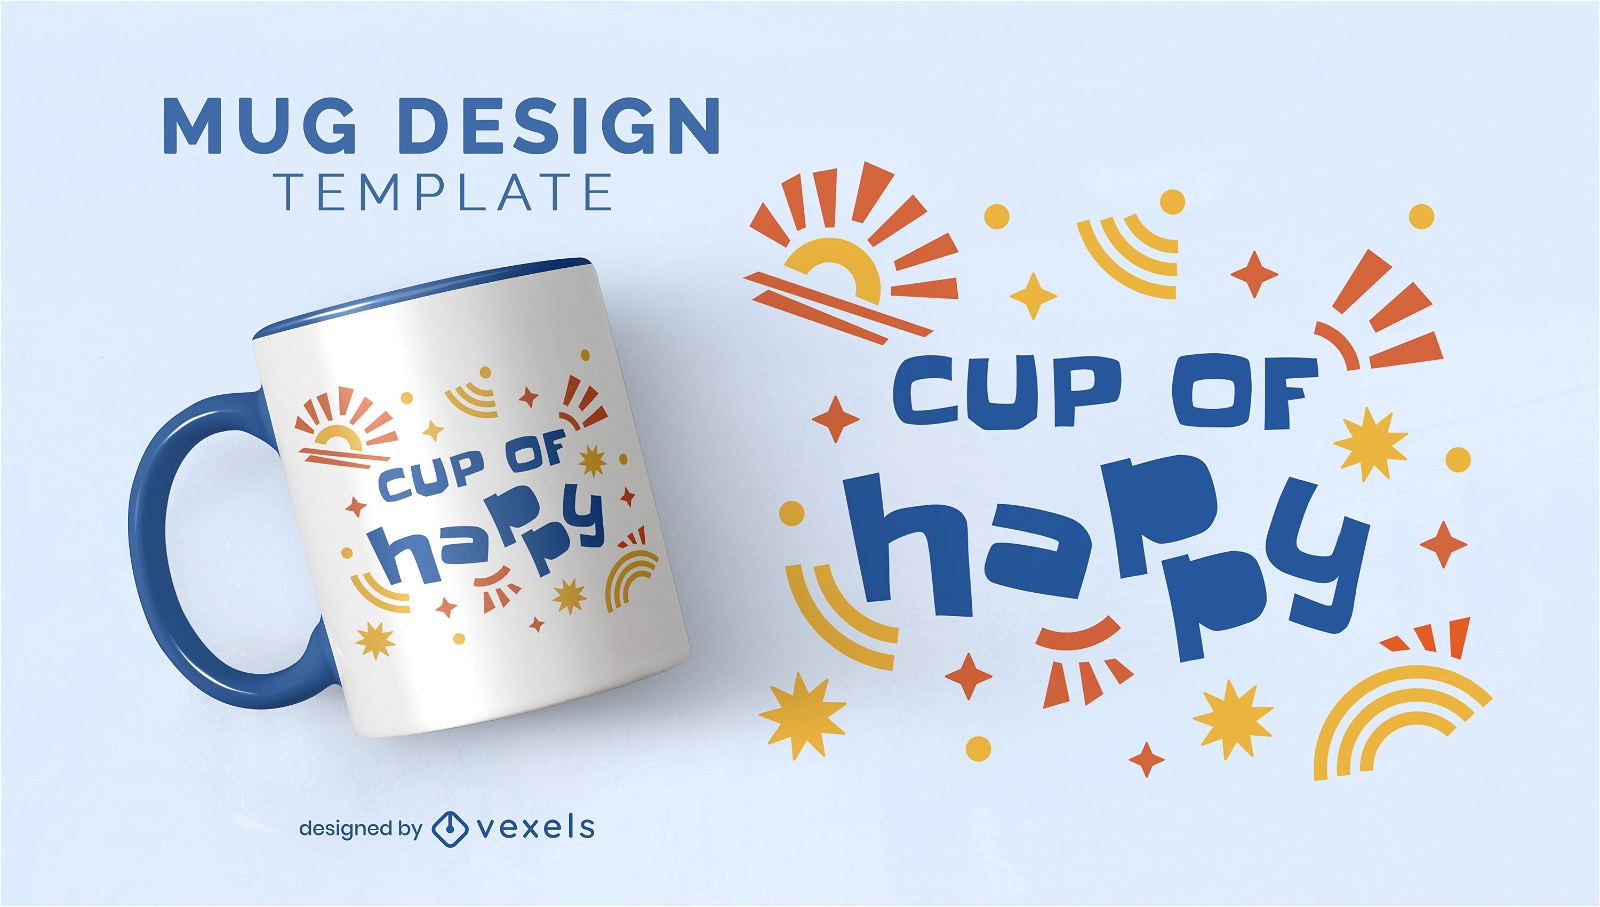 Happy quote with doodles mug design